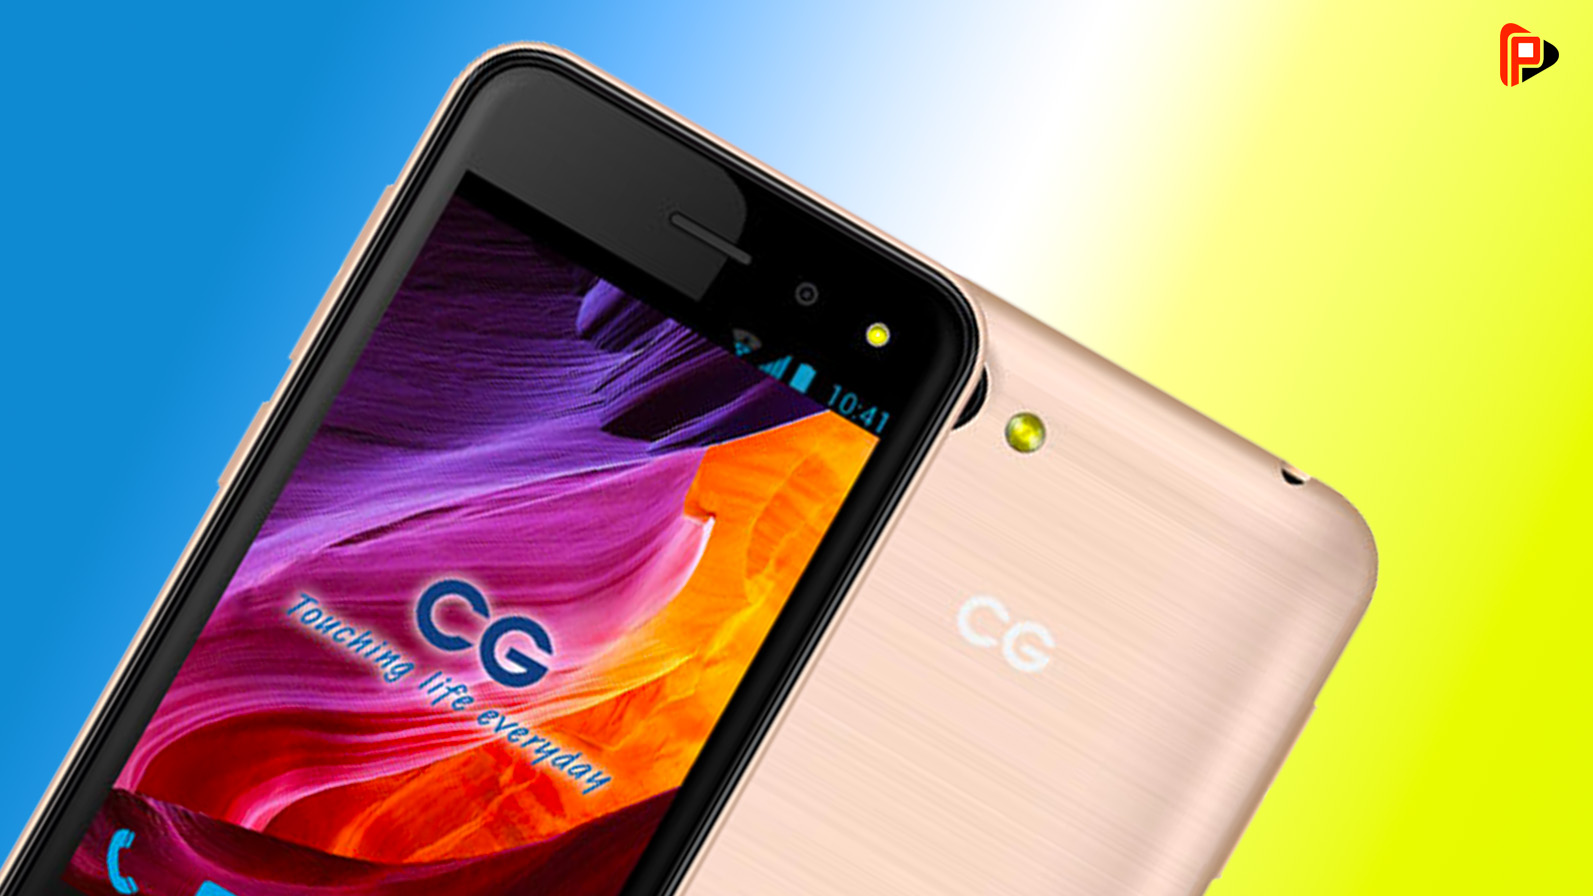 CG Blaze G officially launched in Nepal